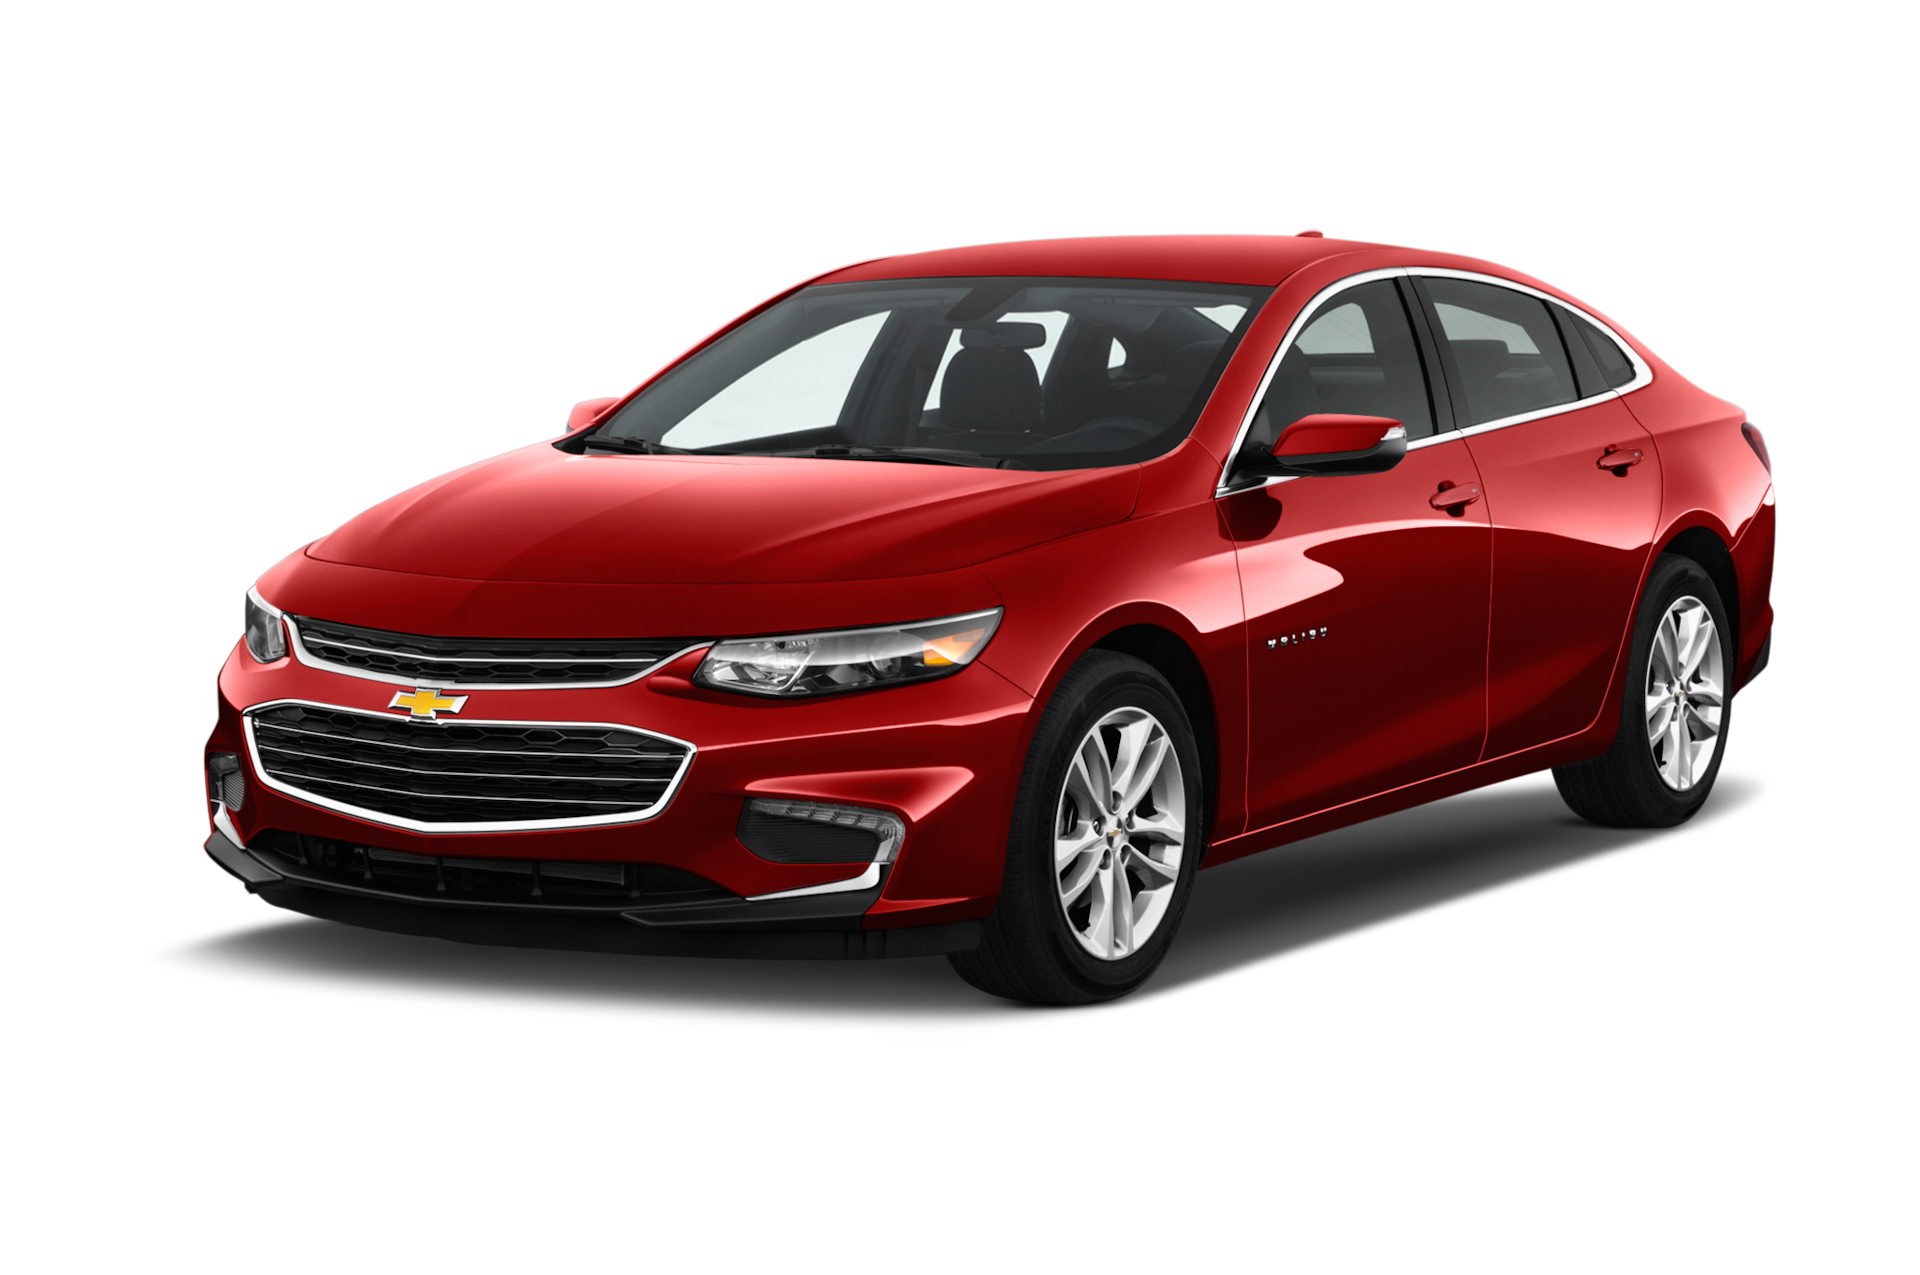 2018 Chevrolet Malibu Prices, Reviews, and Photos - MotorTrend